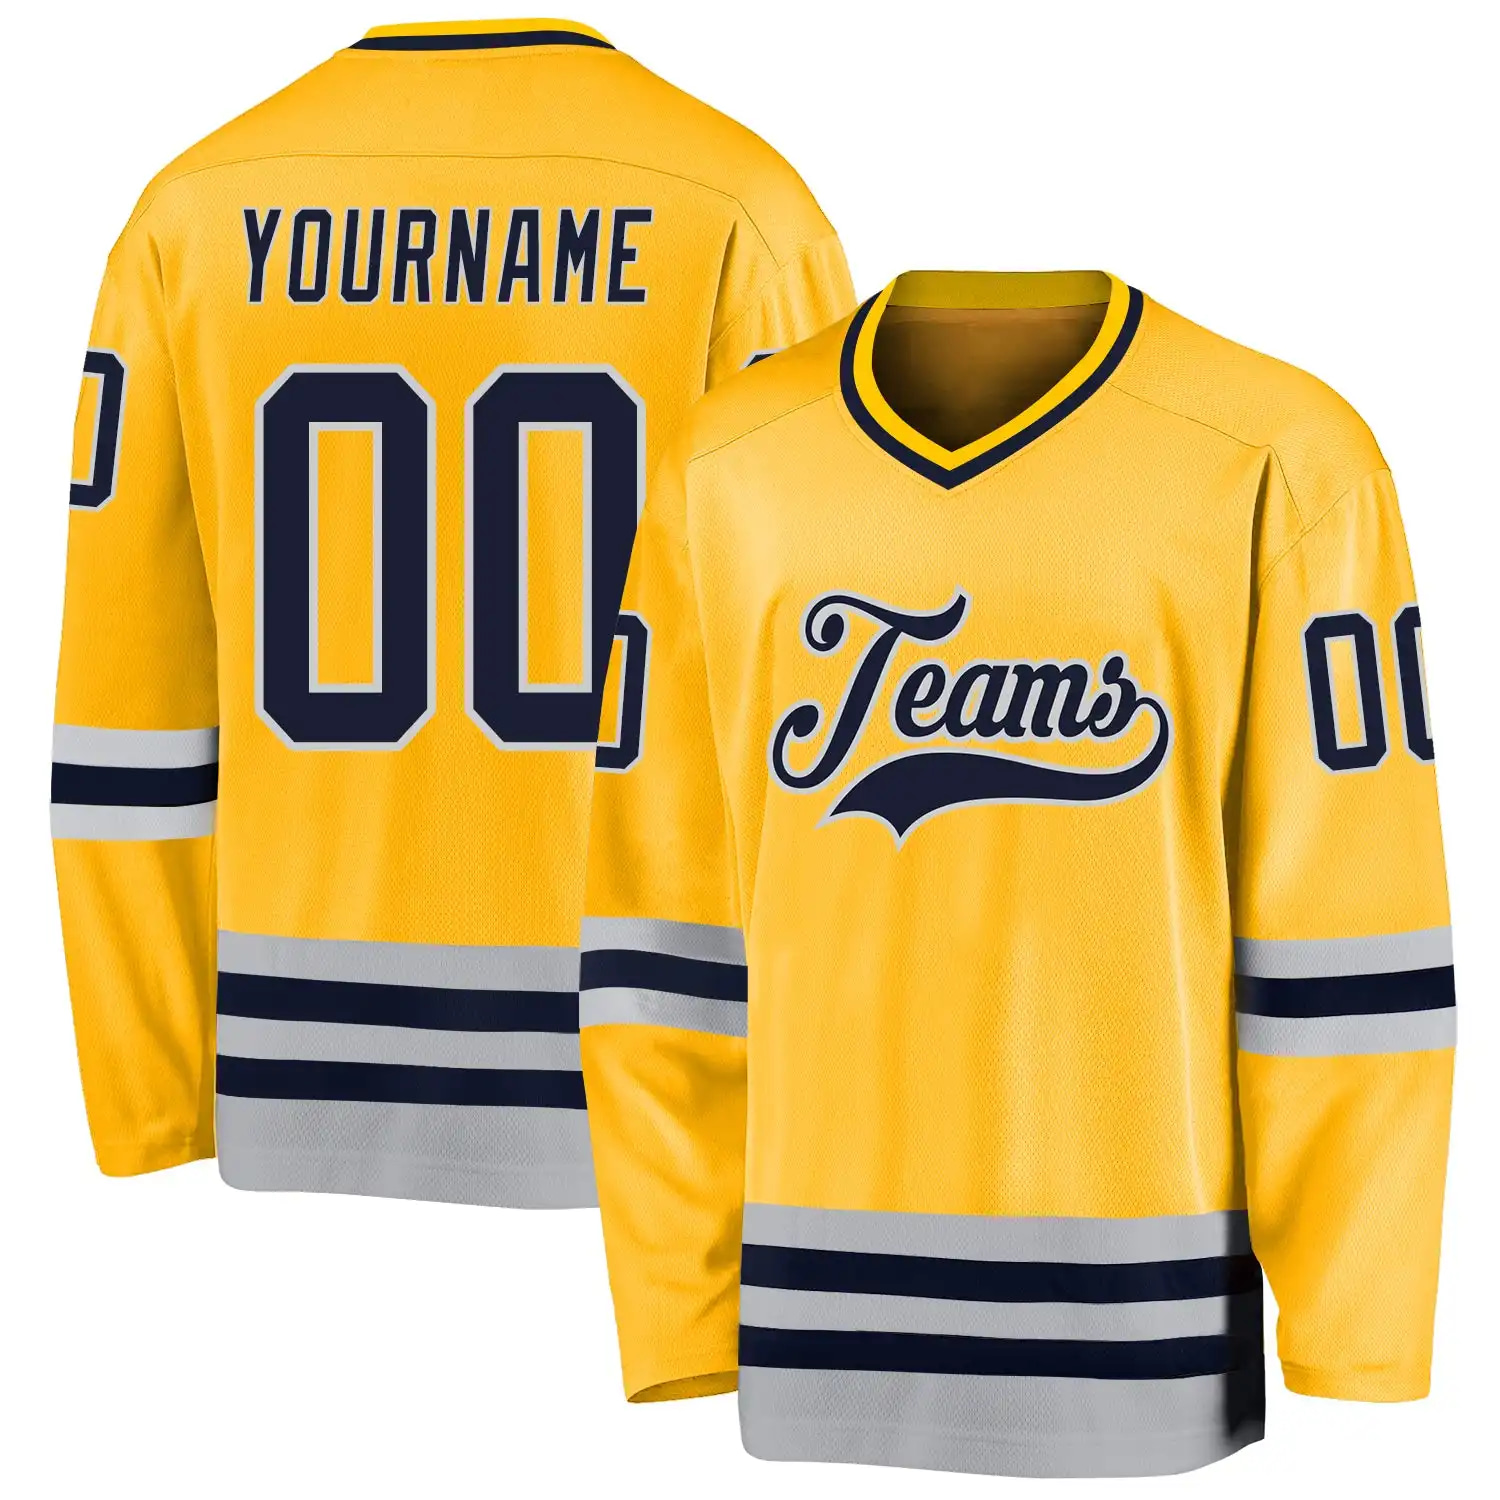 Stitched And Print Gold Navy-gray Hockey Jersey Custom